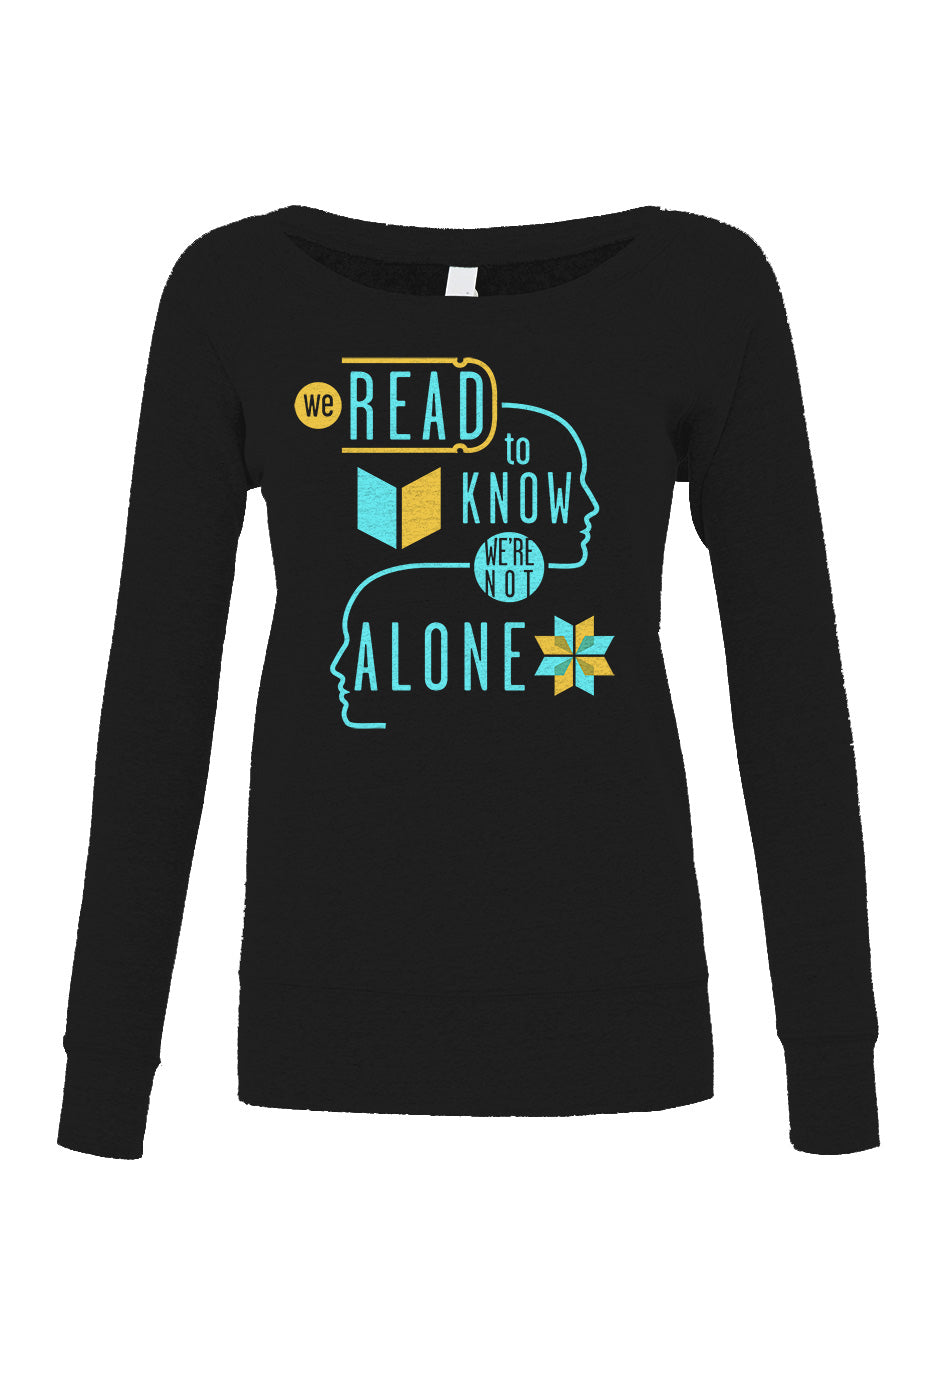 Women's We Read to Know We are Not Alone Scoop Neck Fleece